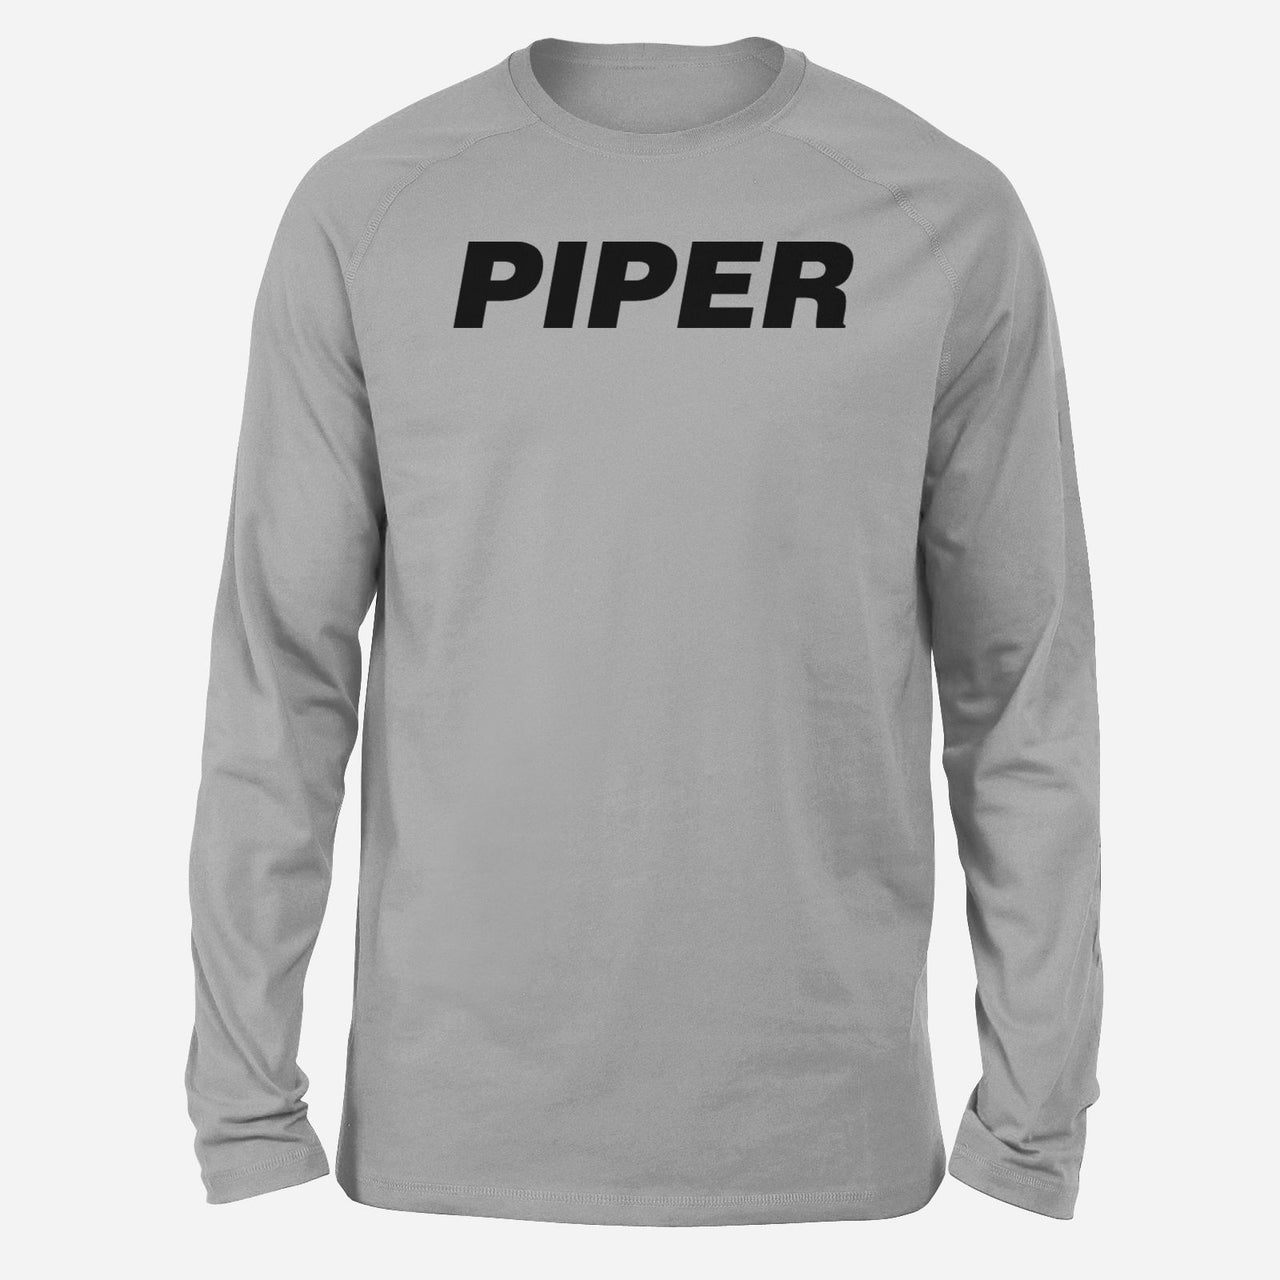 Piper & Text Designed Long-Sleeve T-Shirts